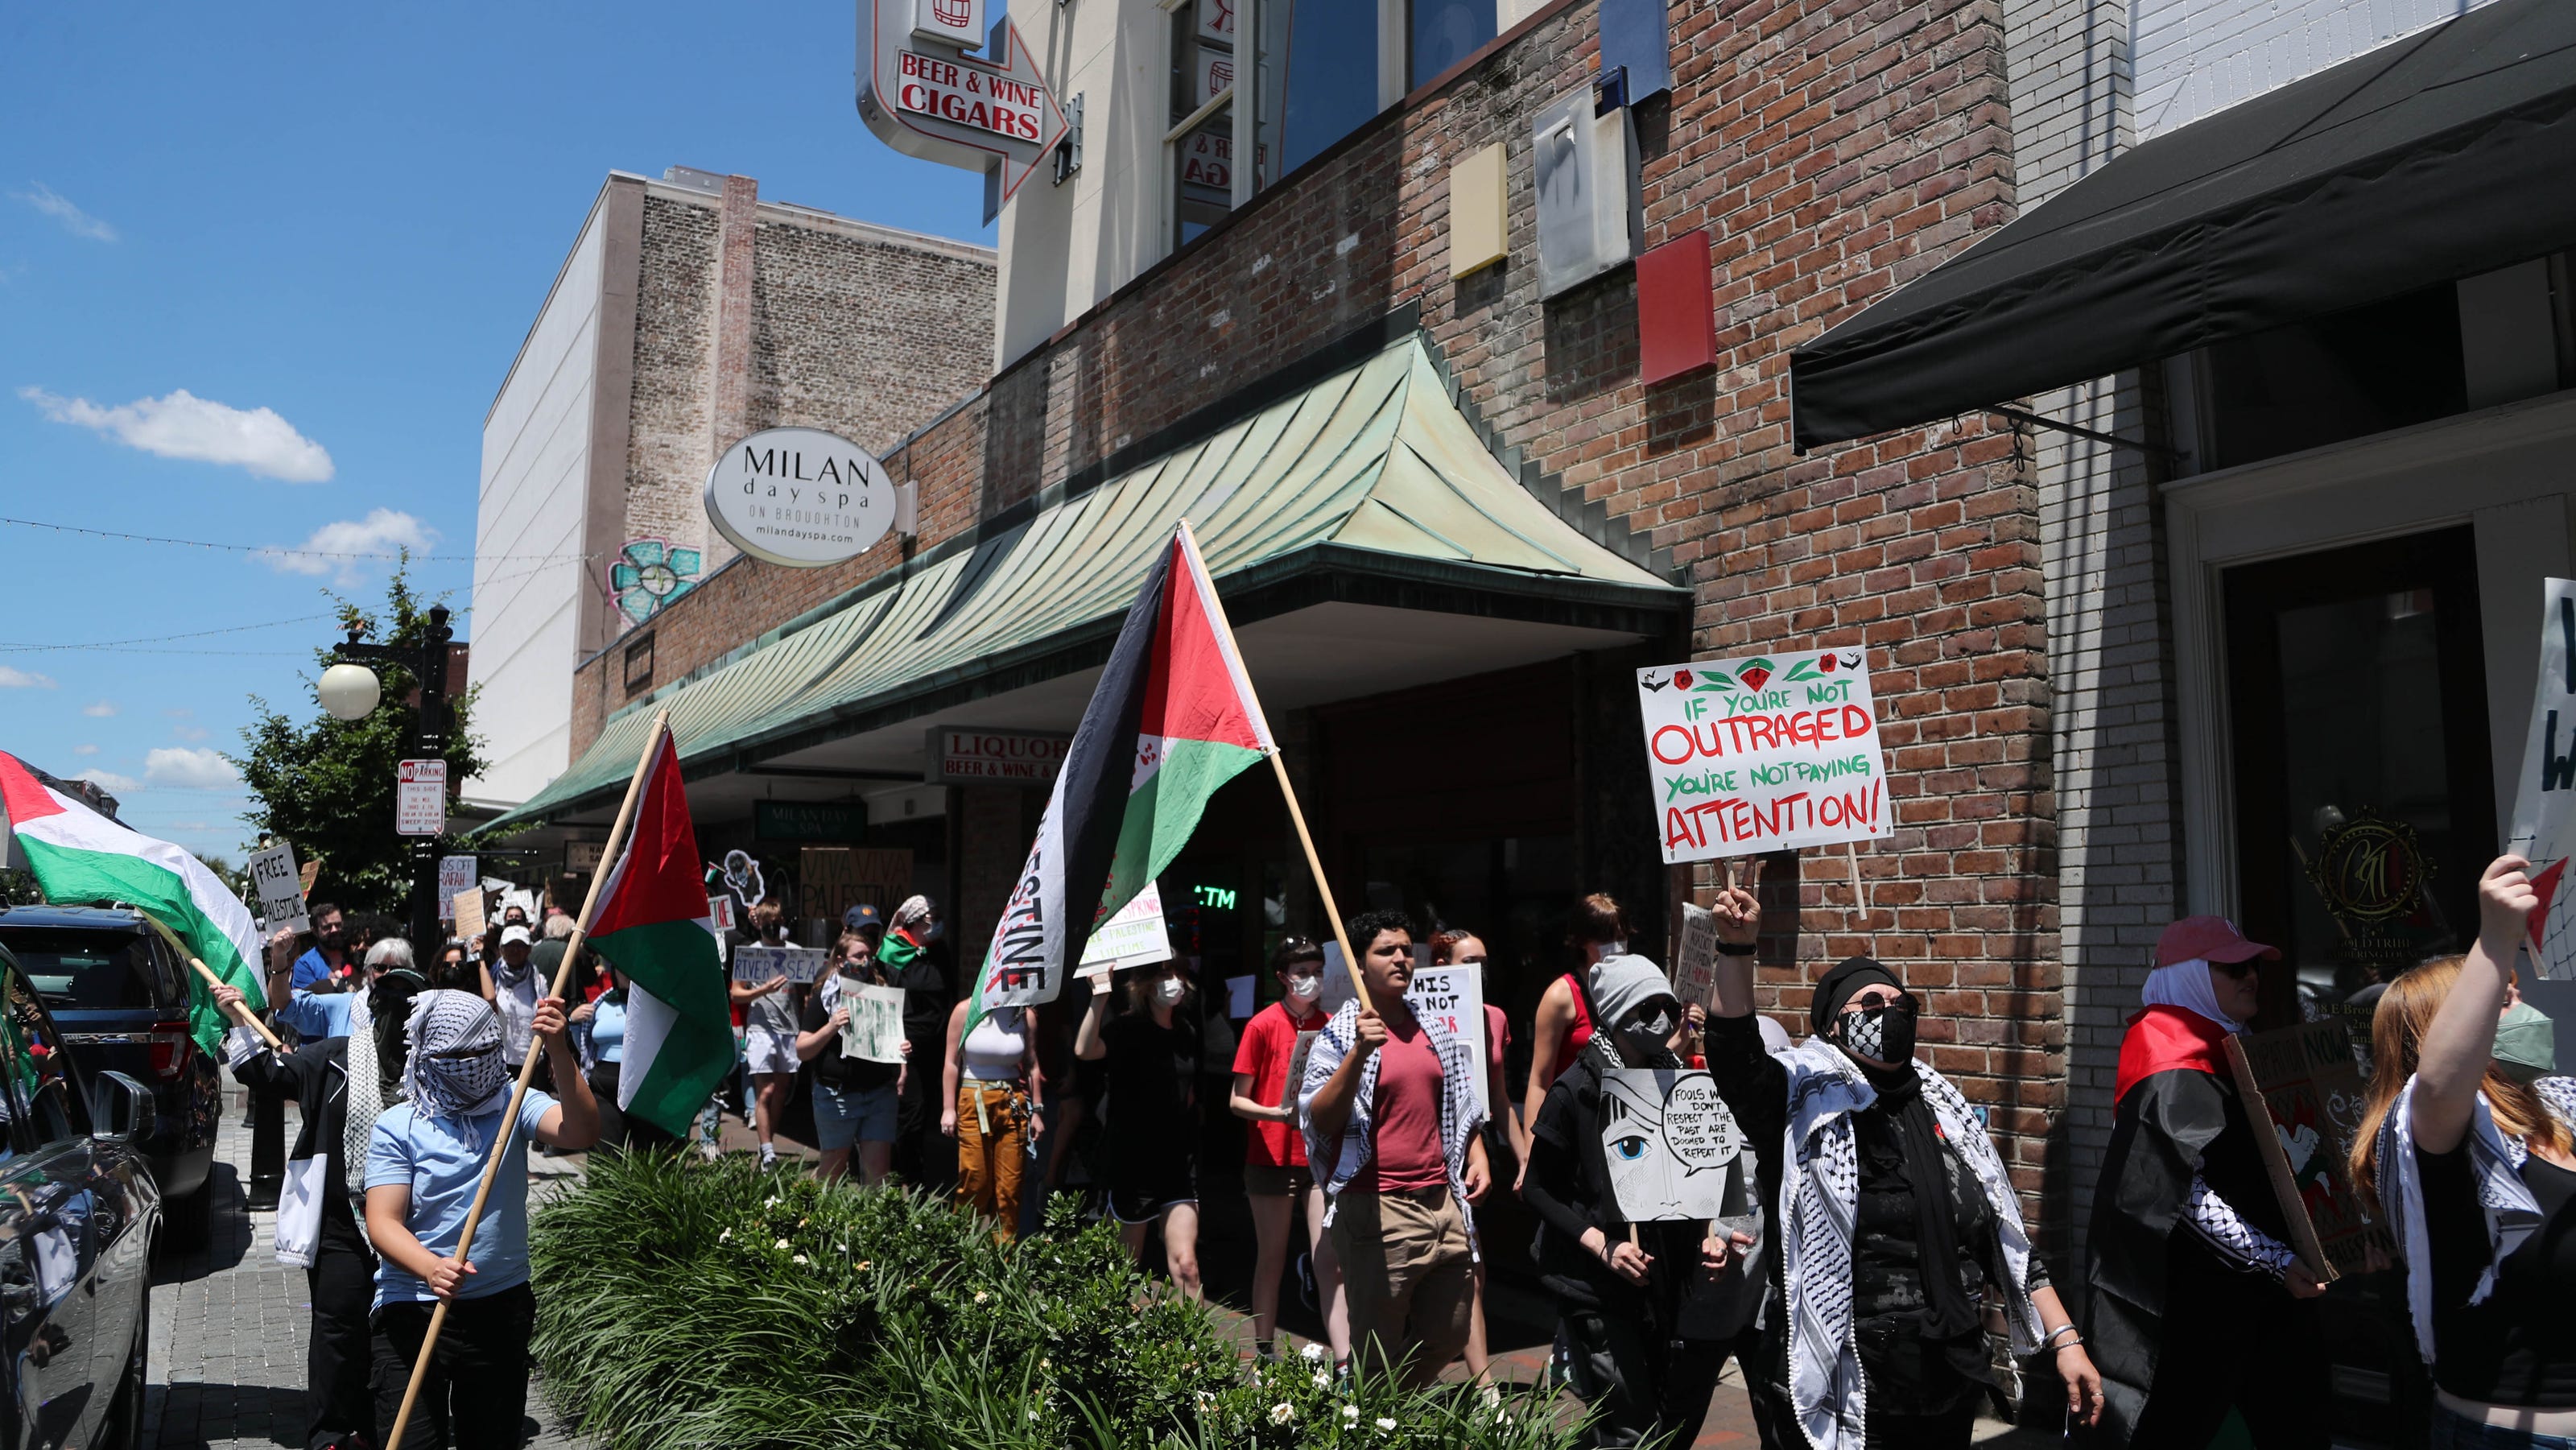   
																More than 100 pro-Palestinian protestors gather and march around downtown Savannah 
															 